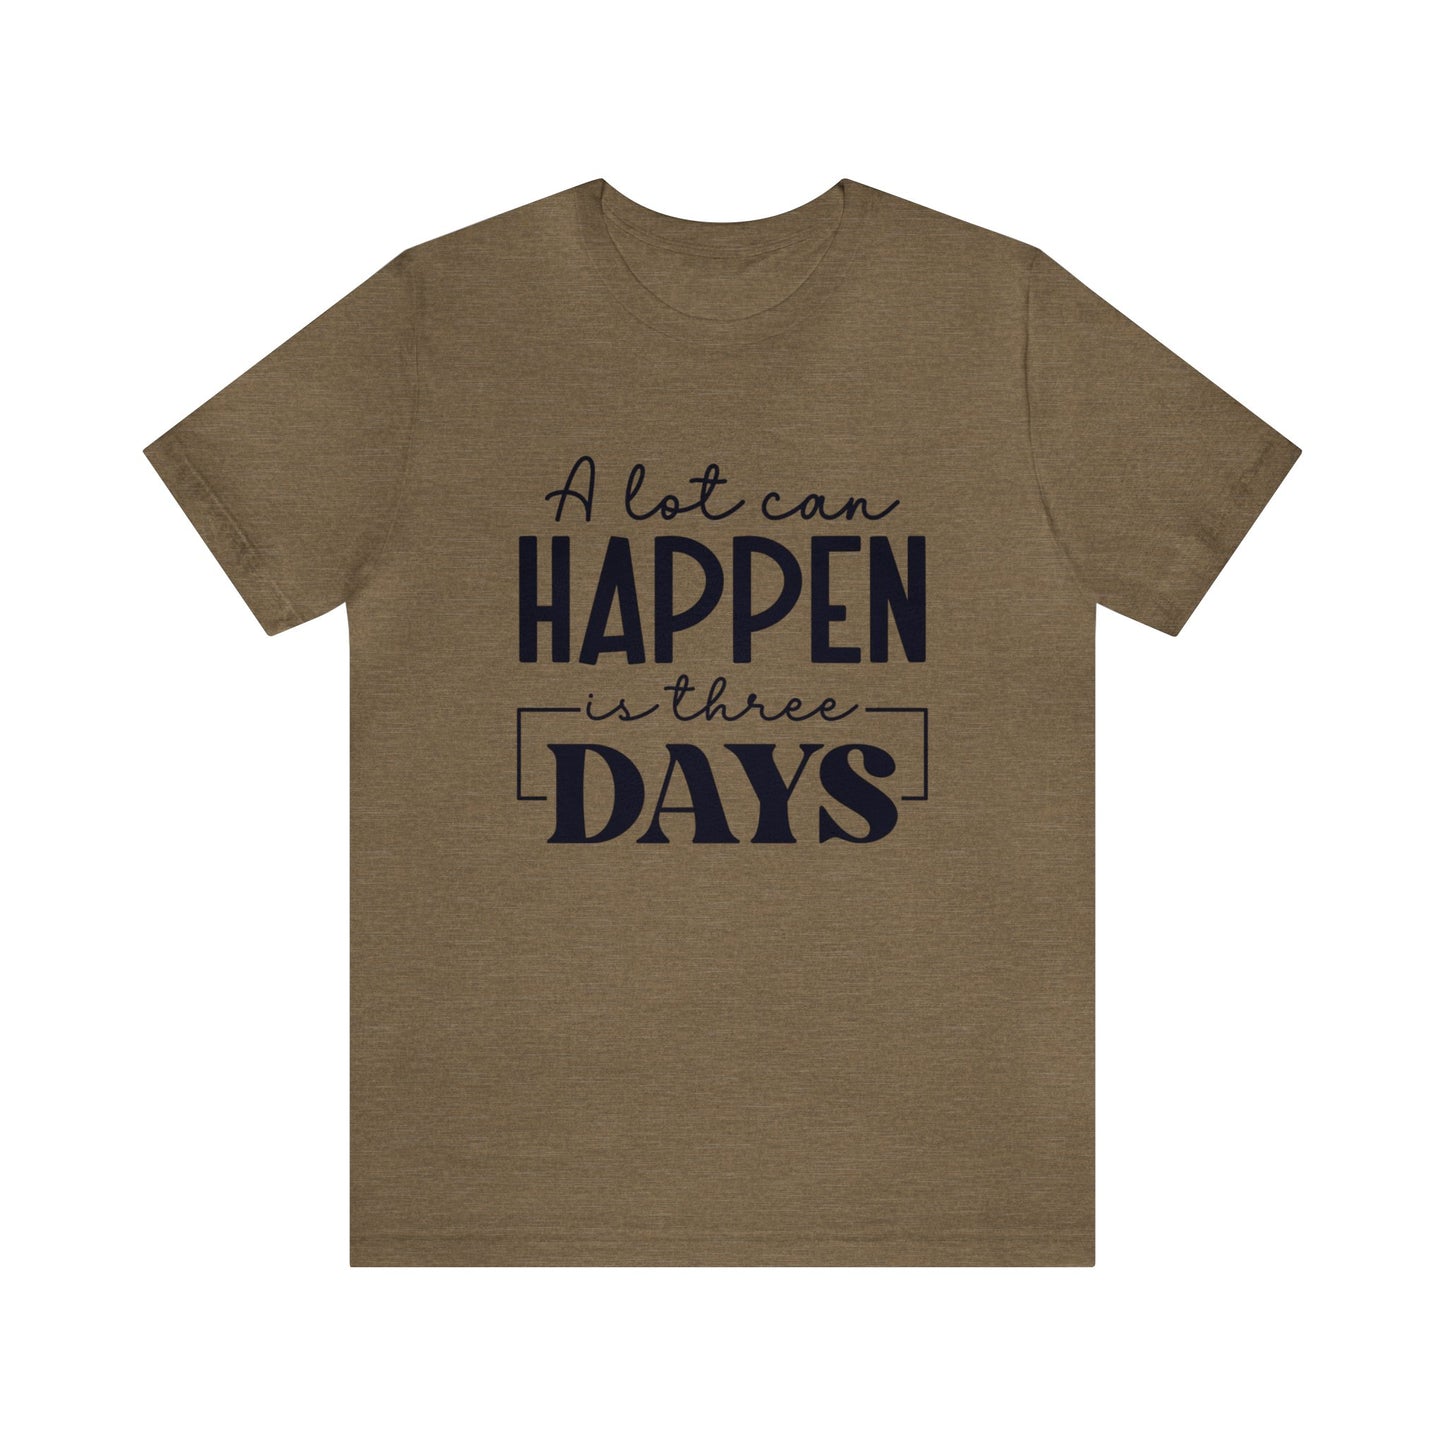 A lot can happen in 3 days Women's Short Sleeve Tee